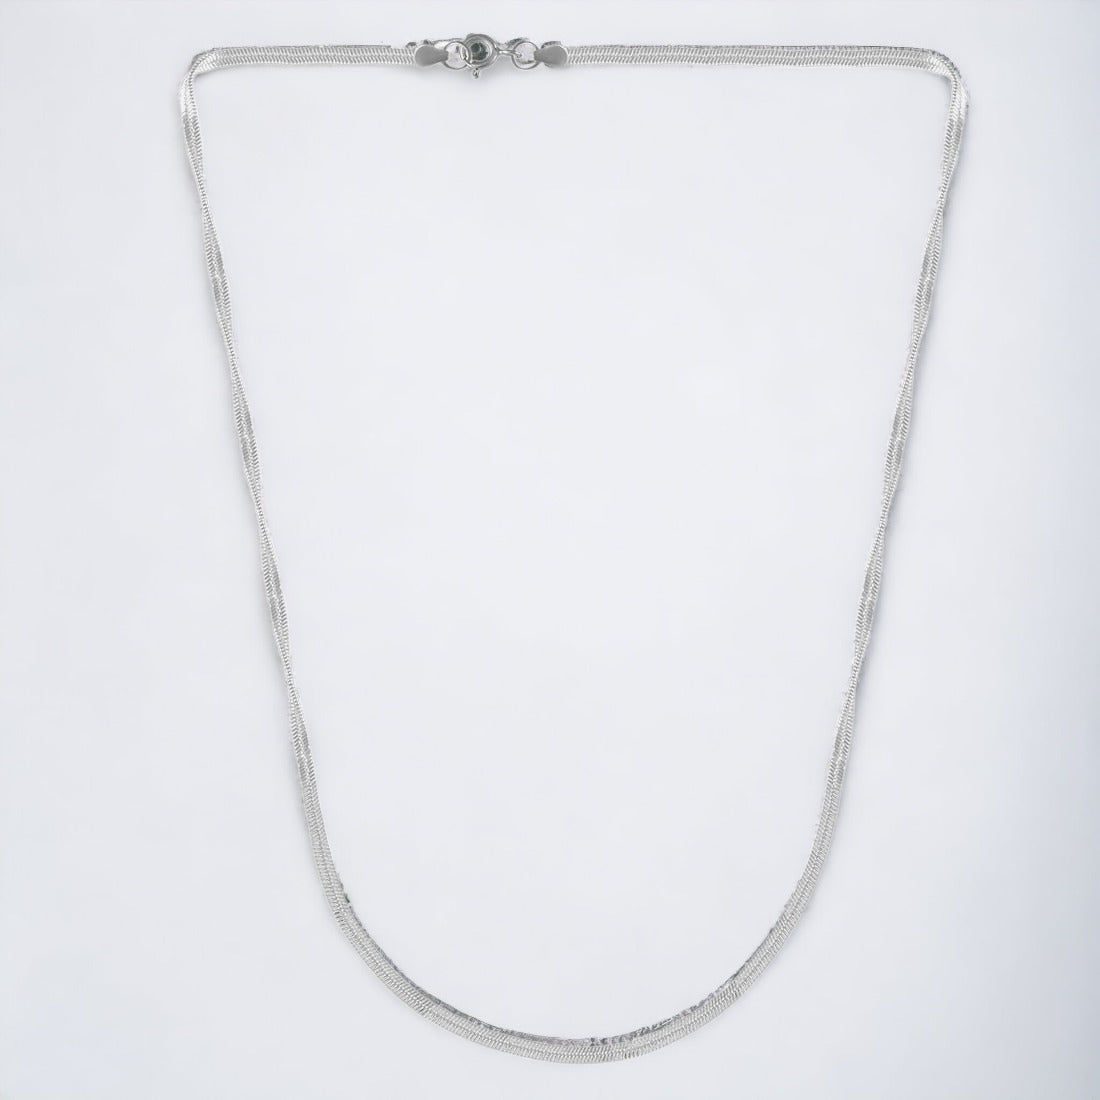 Silver Snake Necklace Chain For Women & Girls